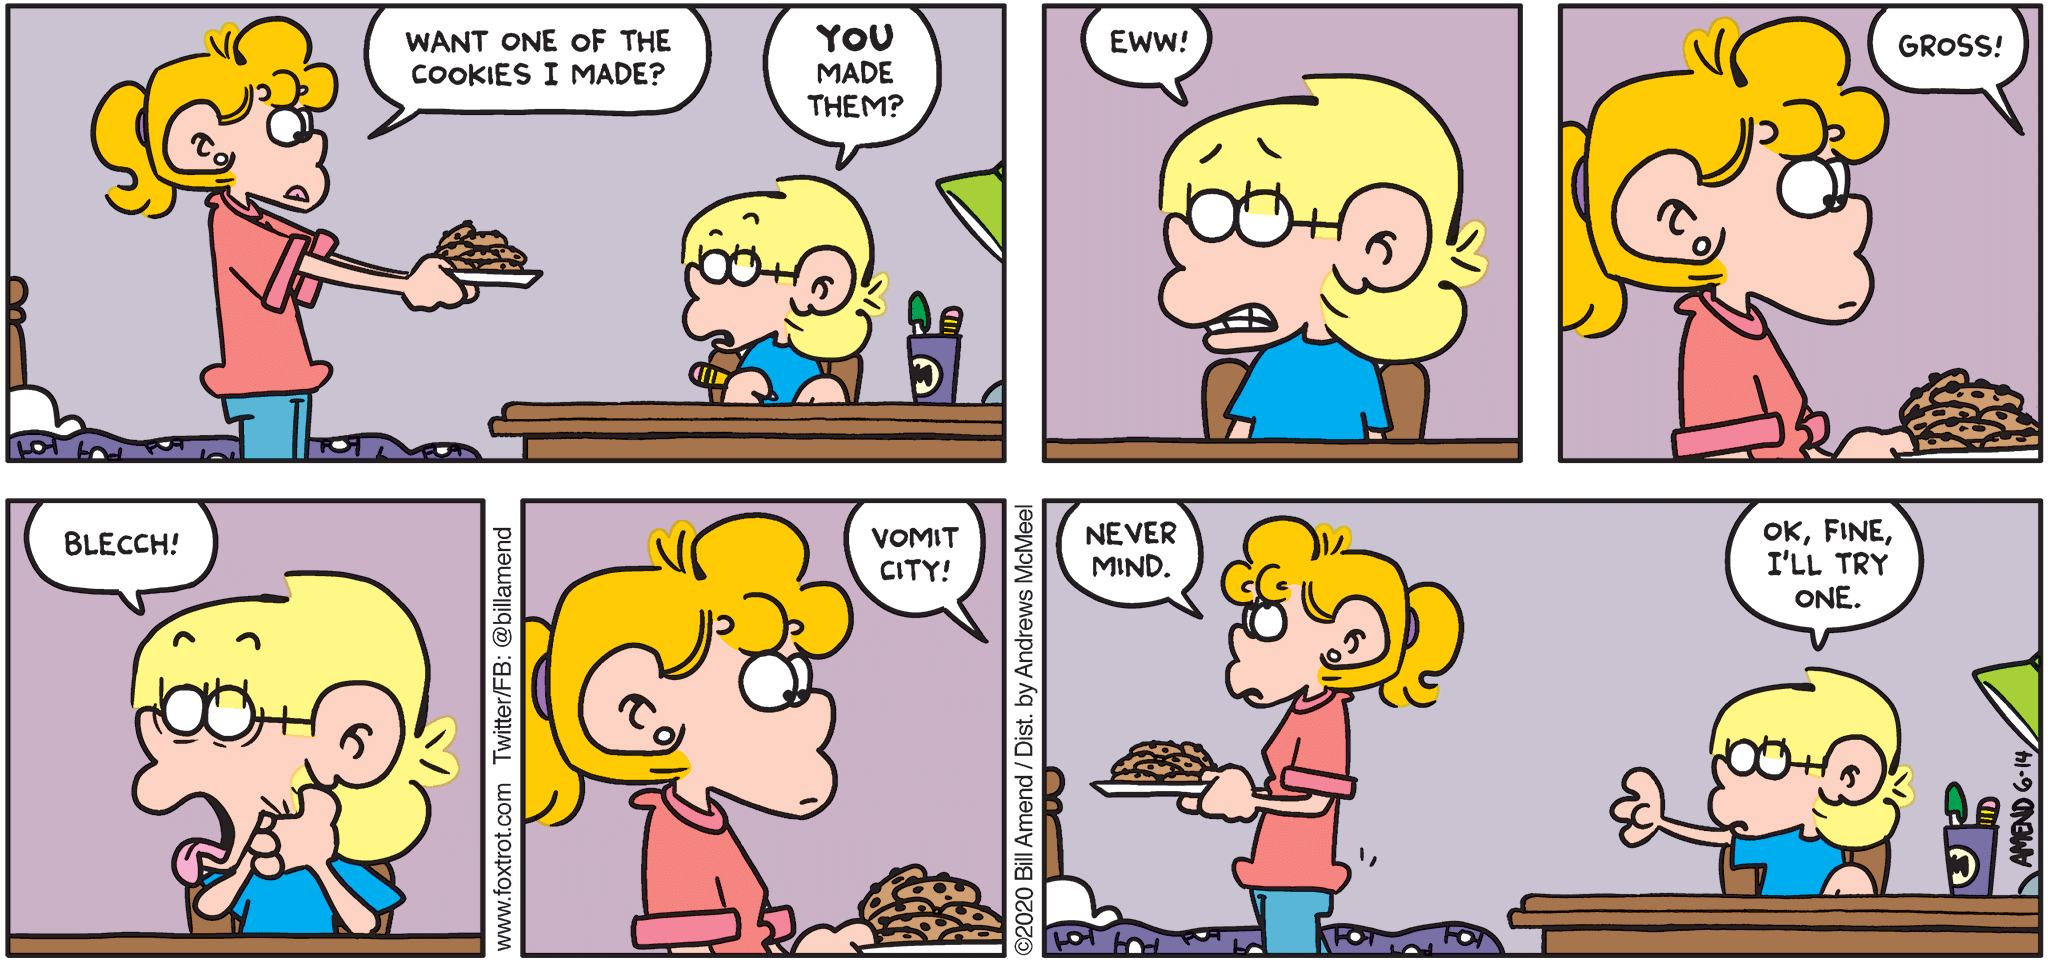 FoxTrot by Bill Amend - "Tough Cookie" published June 14, 2020 - Paige: Want one of the cookies I made? Jason: YOU made them? Eww! Gross! Blecch! Vomit City. Paige: Never mind. Jason: Ok, fine, I'll try one.